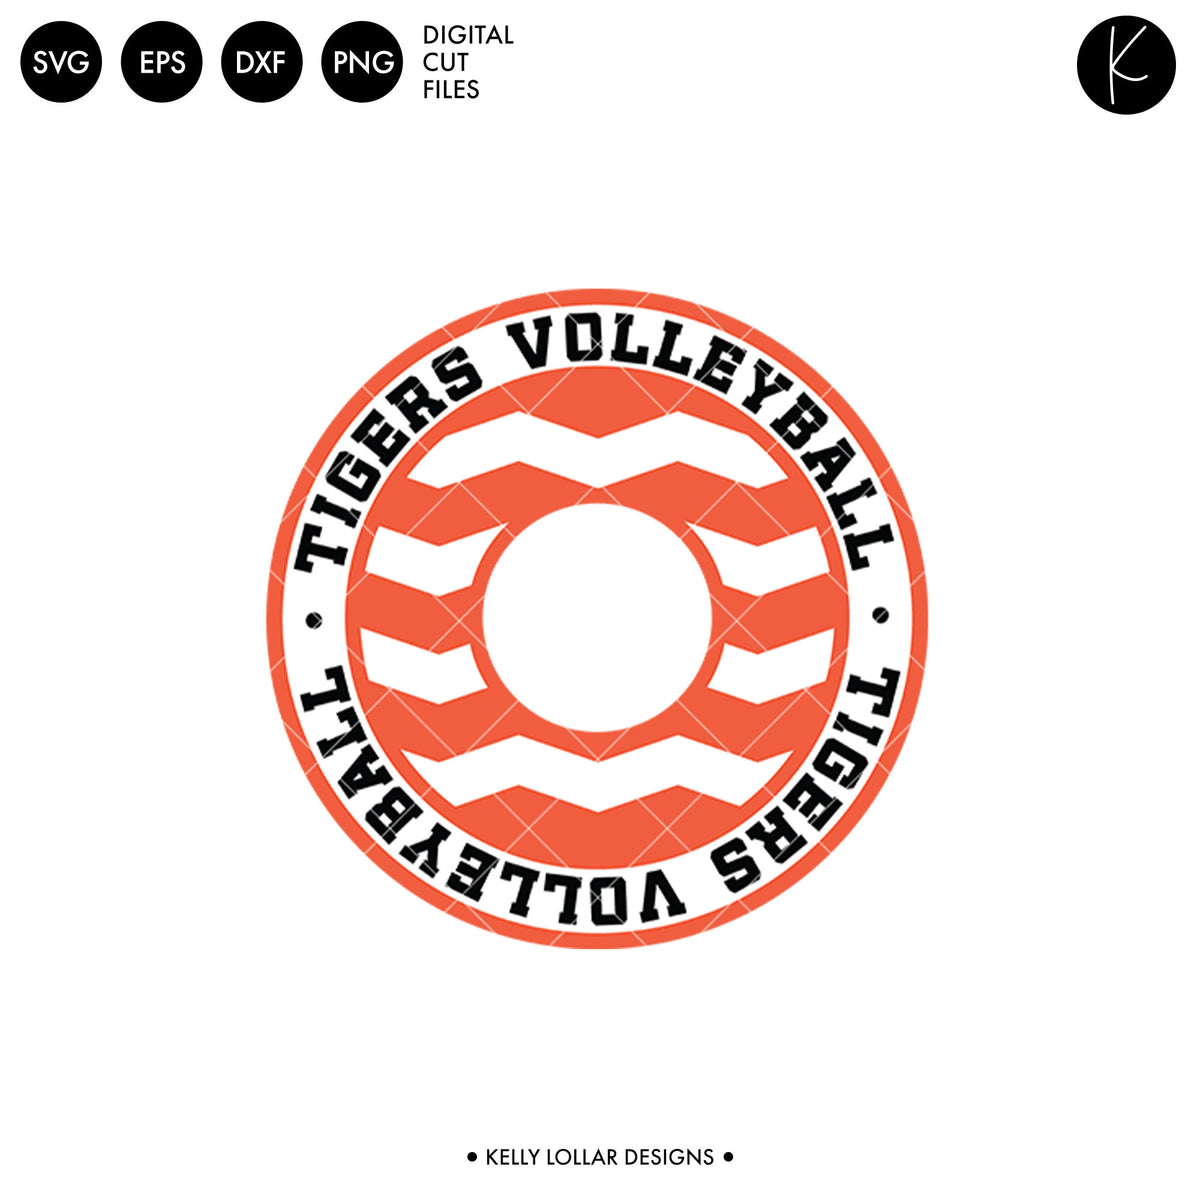 Tigers Volleyball Bundle | SVG DXF EPS PNG Cut Files